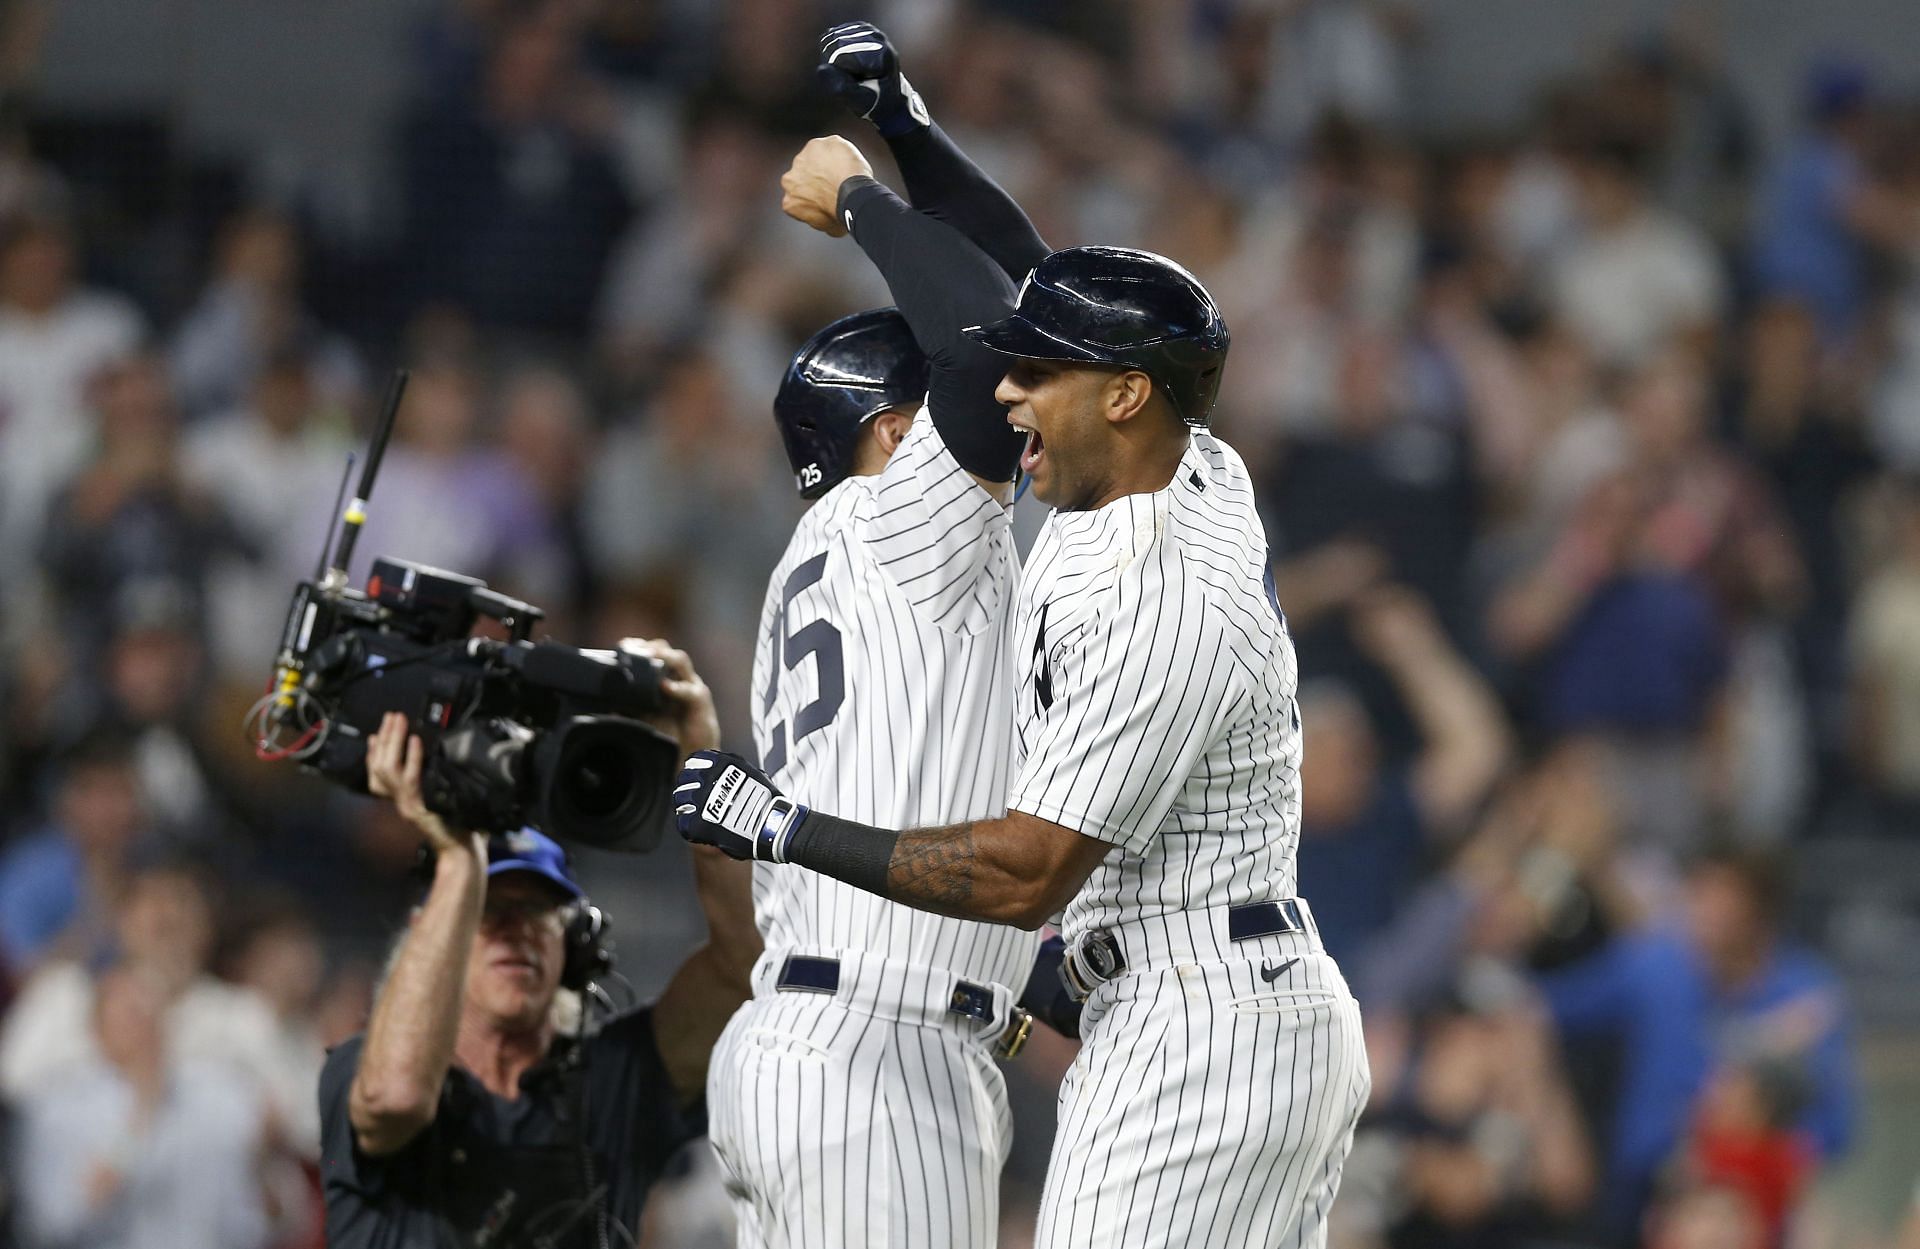 Aaron Hicks of the New York Yankees celebrates his ninth inning game-tying three-run home run against the Houston Astros.